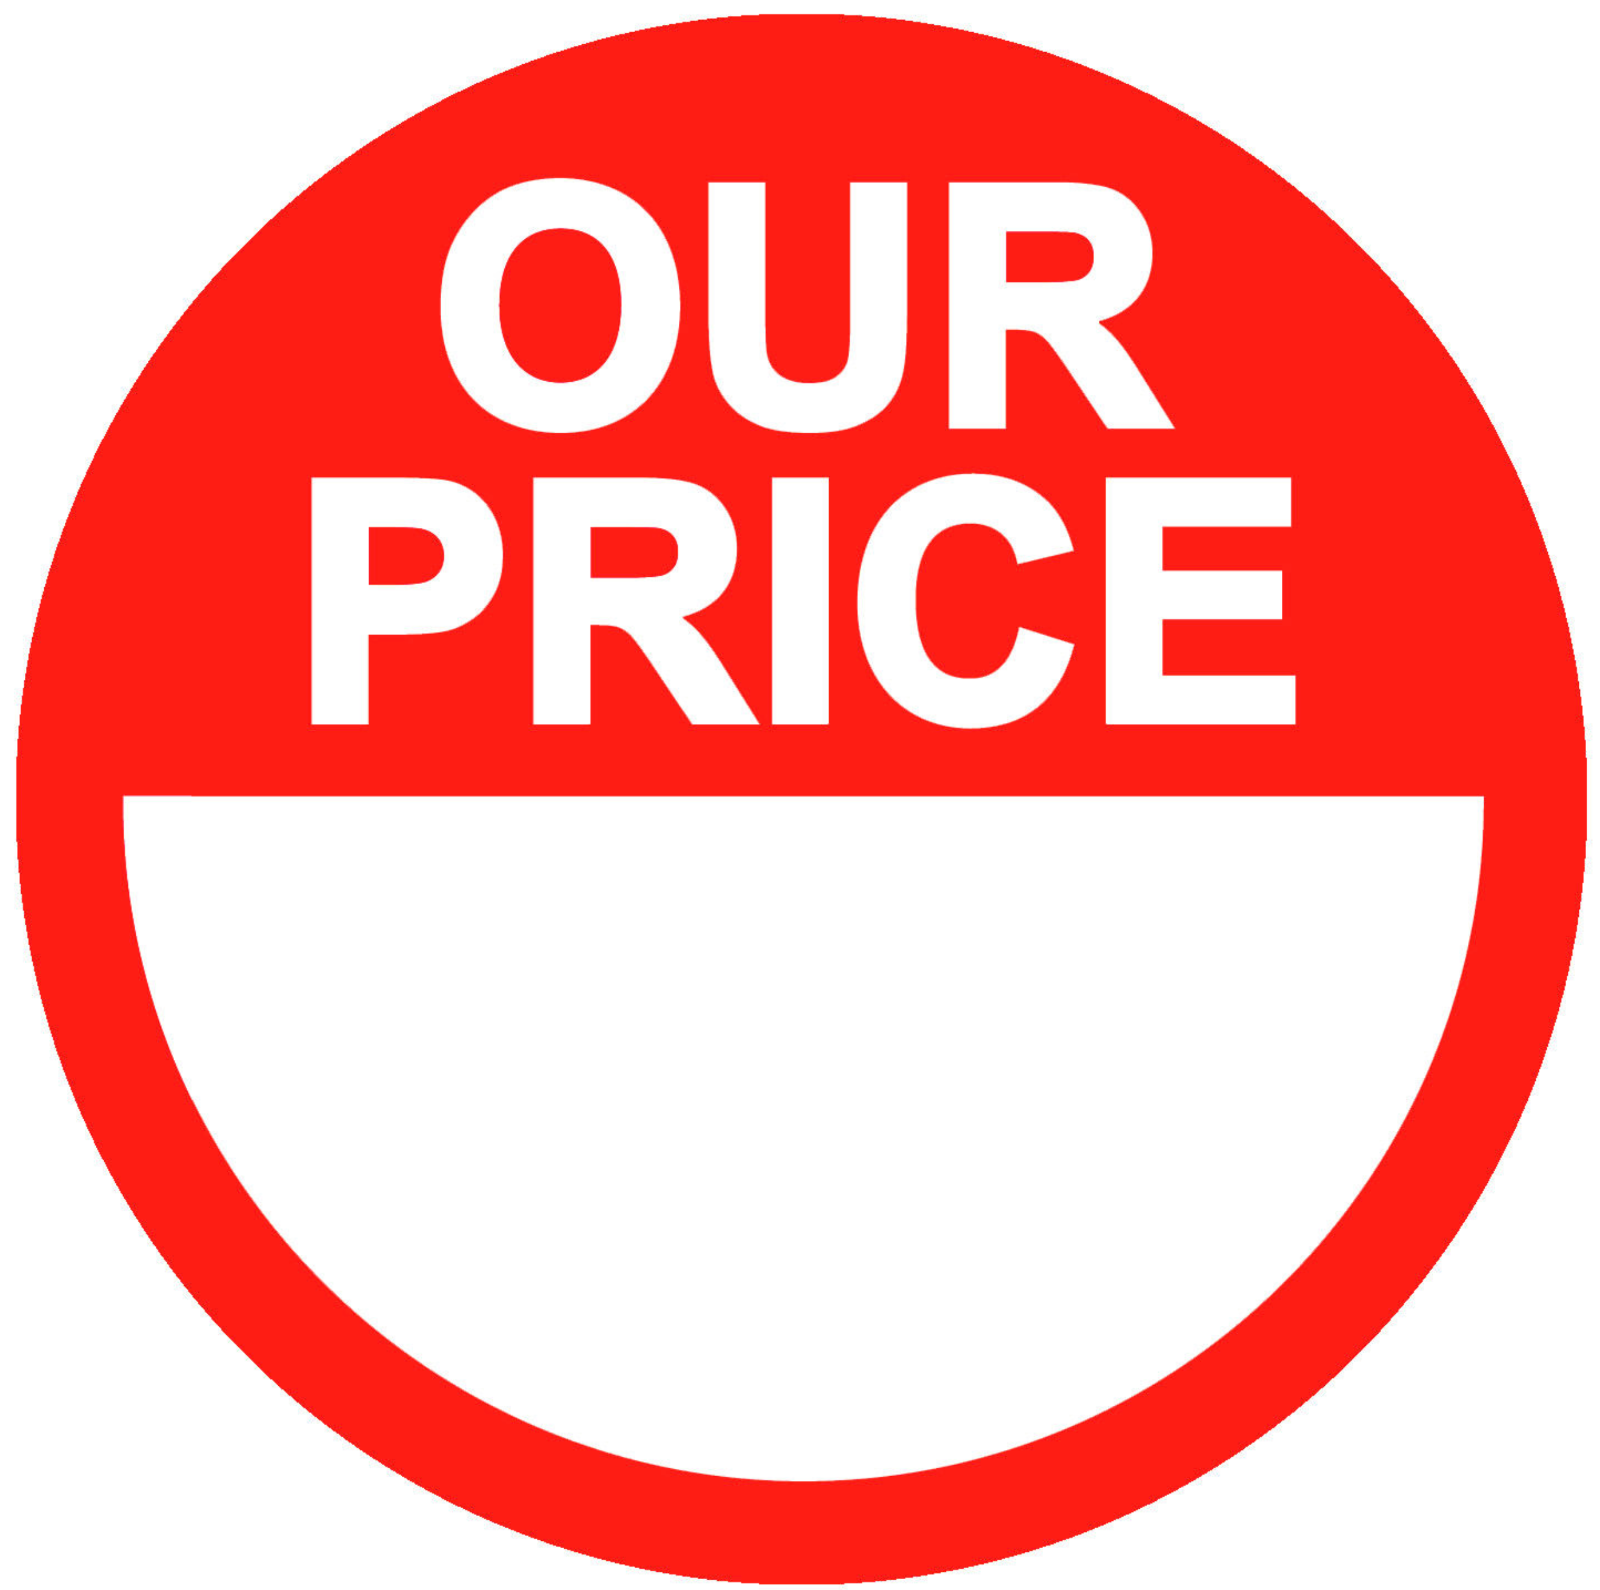 Thermal Printer - Circular - Red - Our Price - Price Labels / Stickers